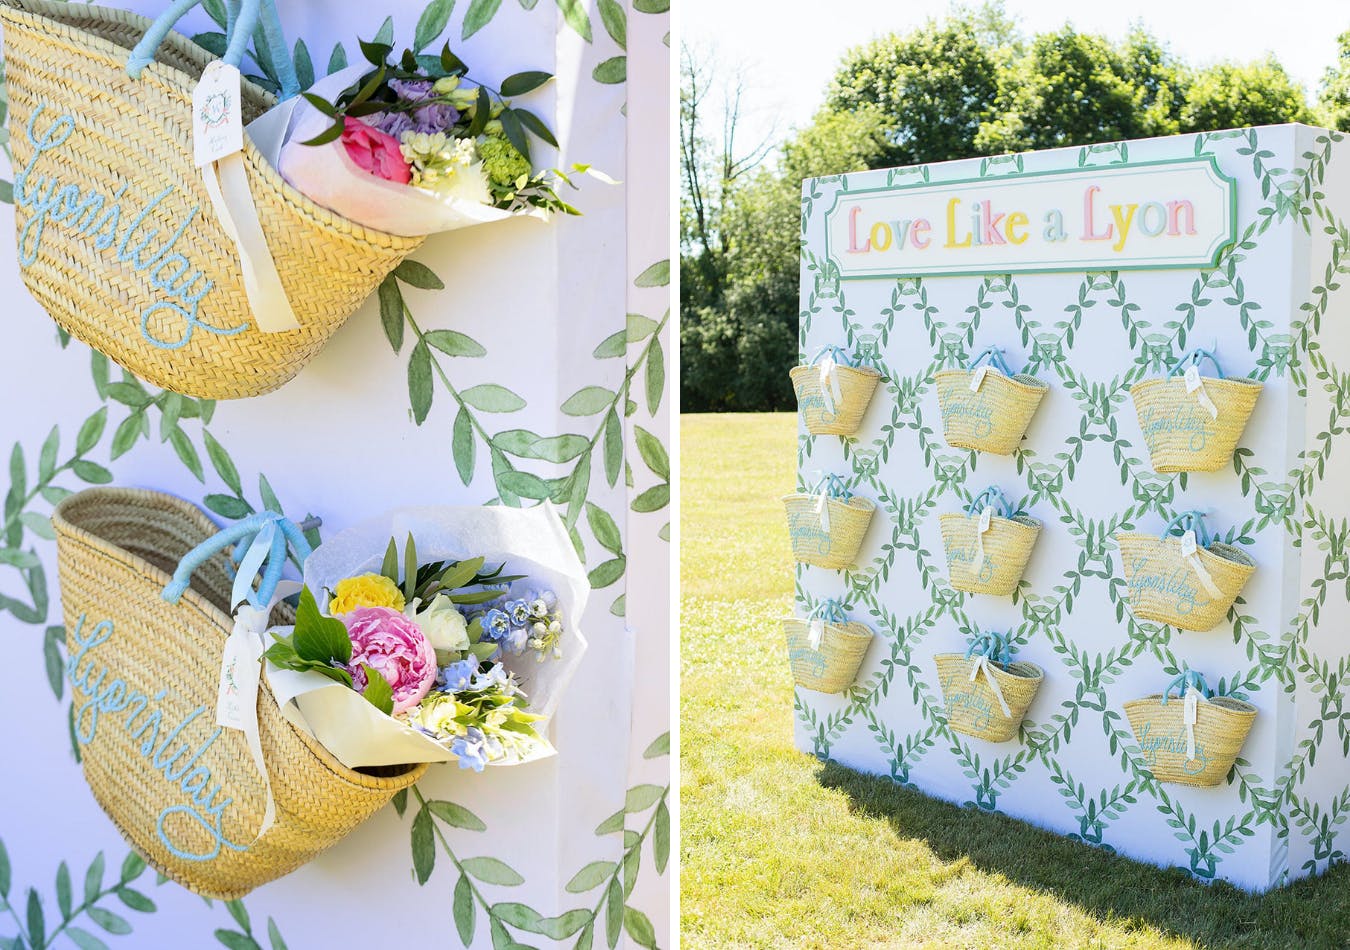 Outdoor launch party with tote bag wall in light blue and white colors | PartySlate